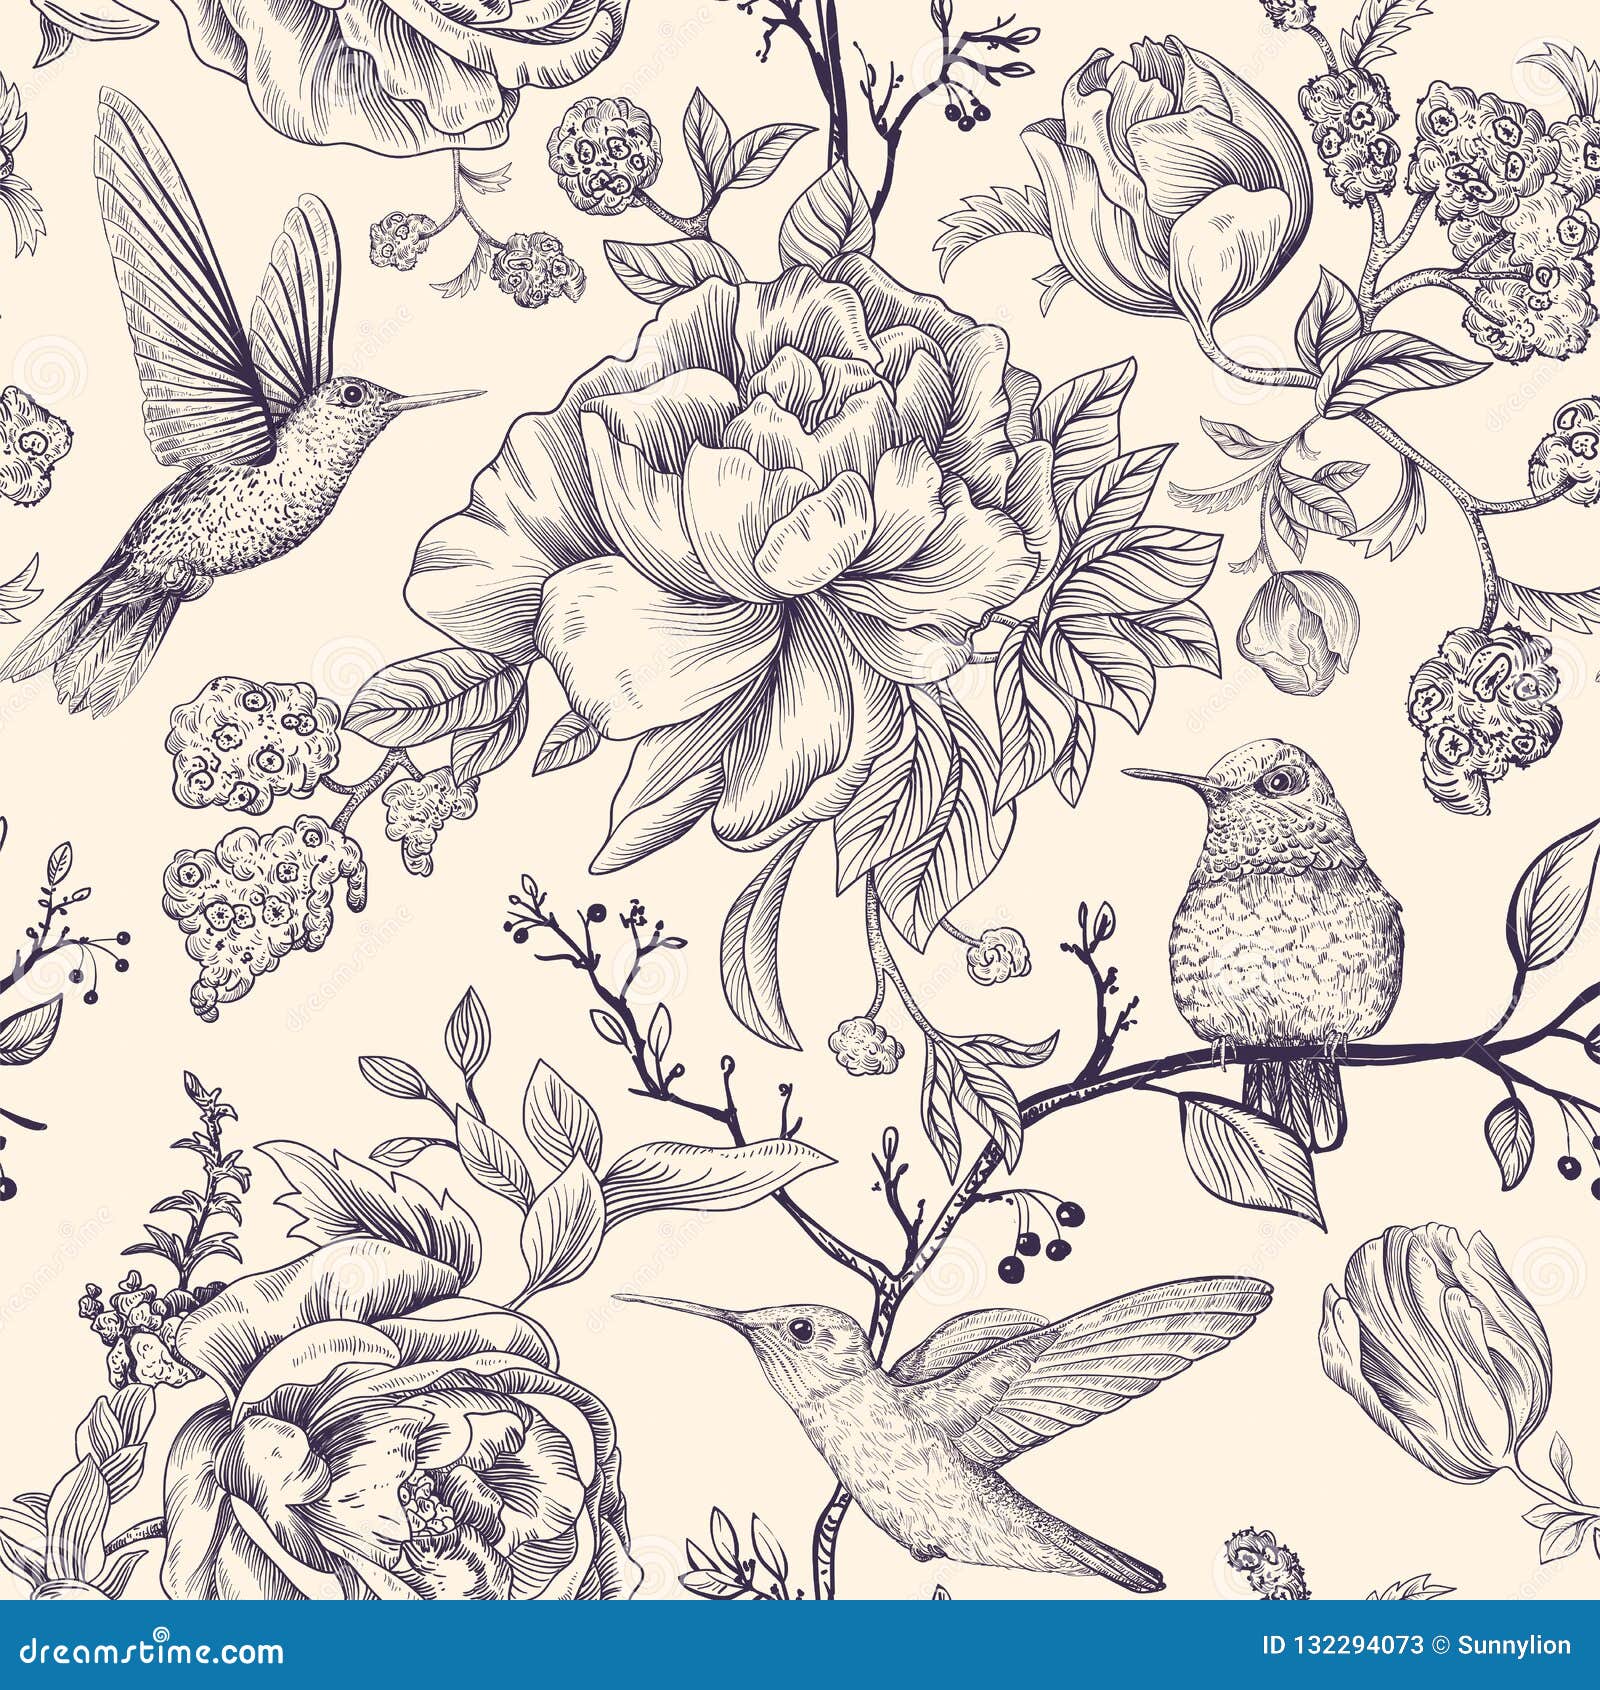  sketch pattern with birds and flowers. monochrome flower  for web, wrapping paper, phone cover, textile